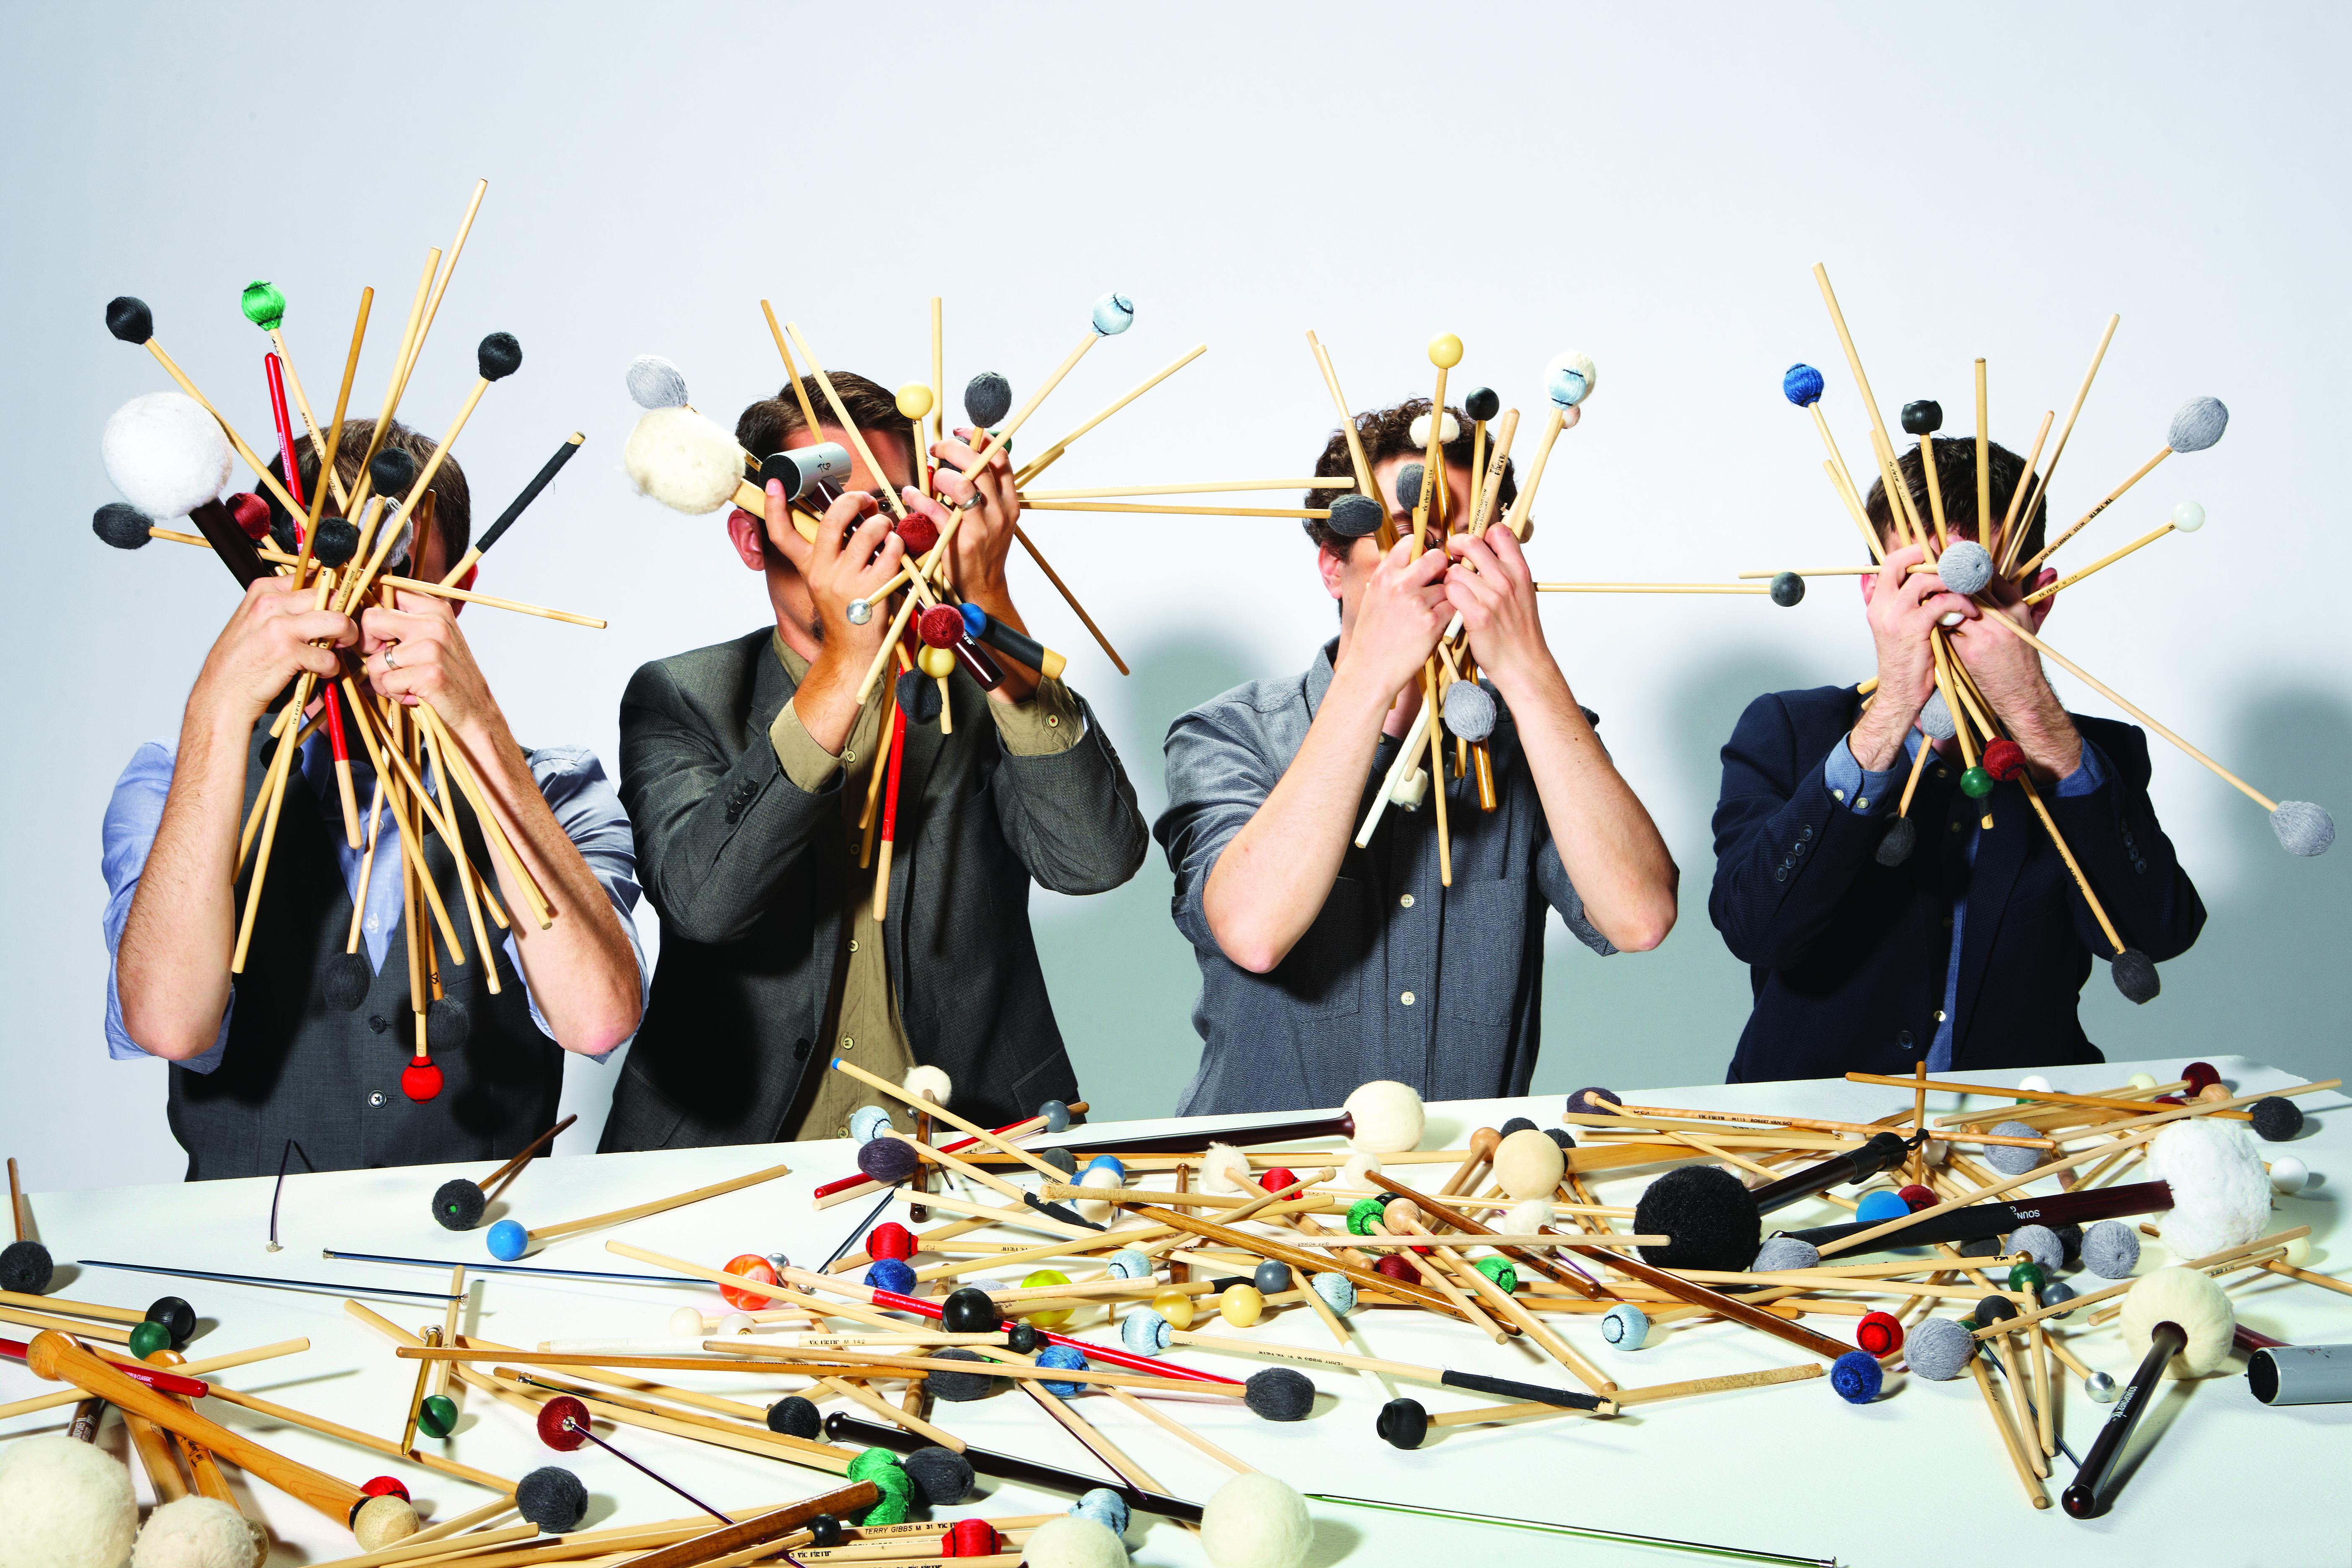 Four men in dress shirts and suit jackets hold handfuls of drumsticks and mallets in front of their faces while sitting at a table also covered with drumsticks and mallets.